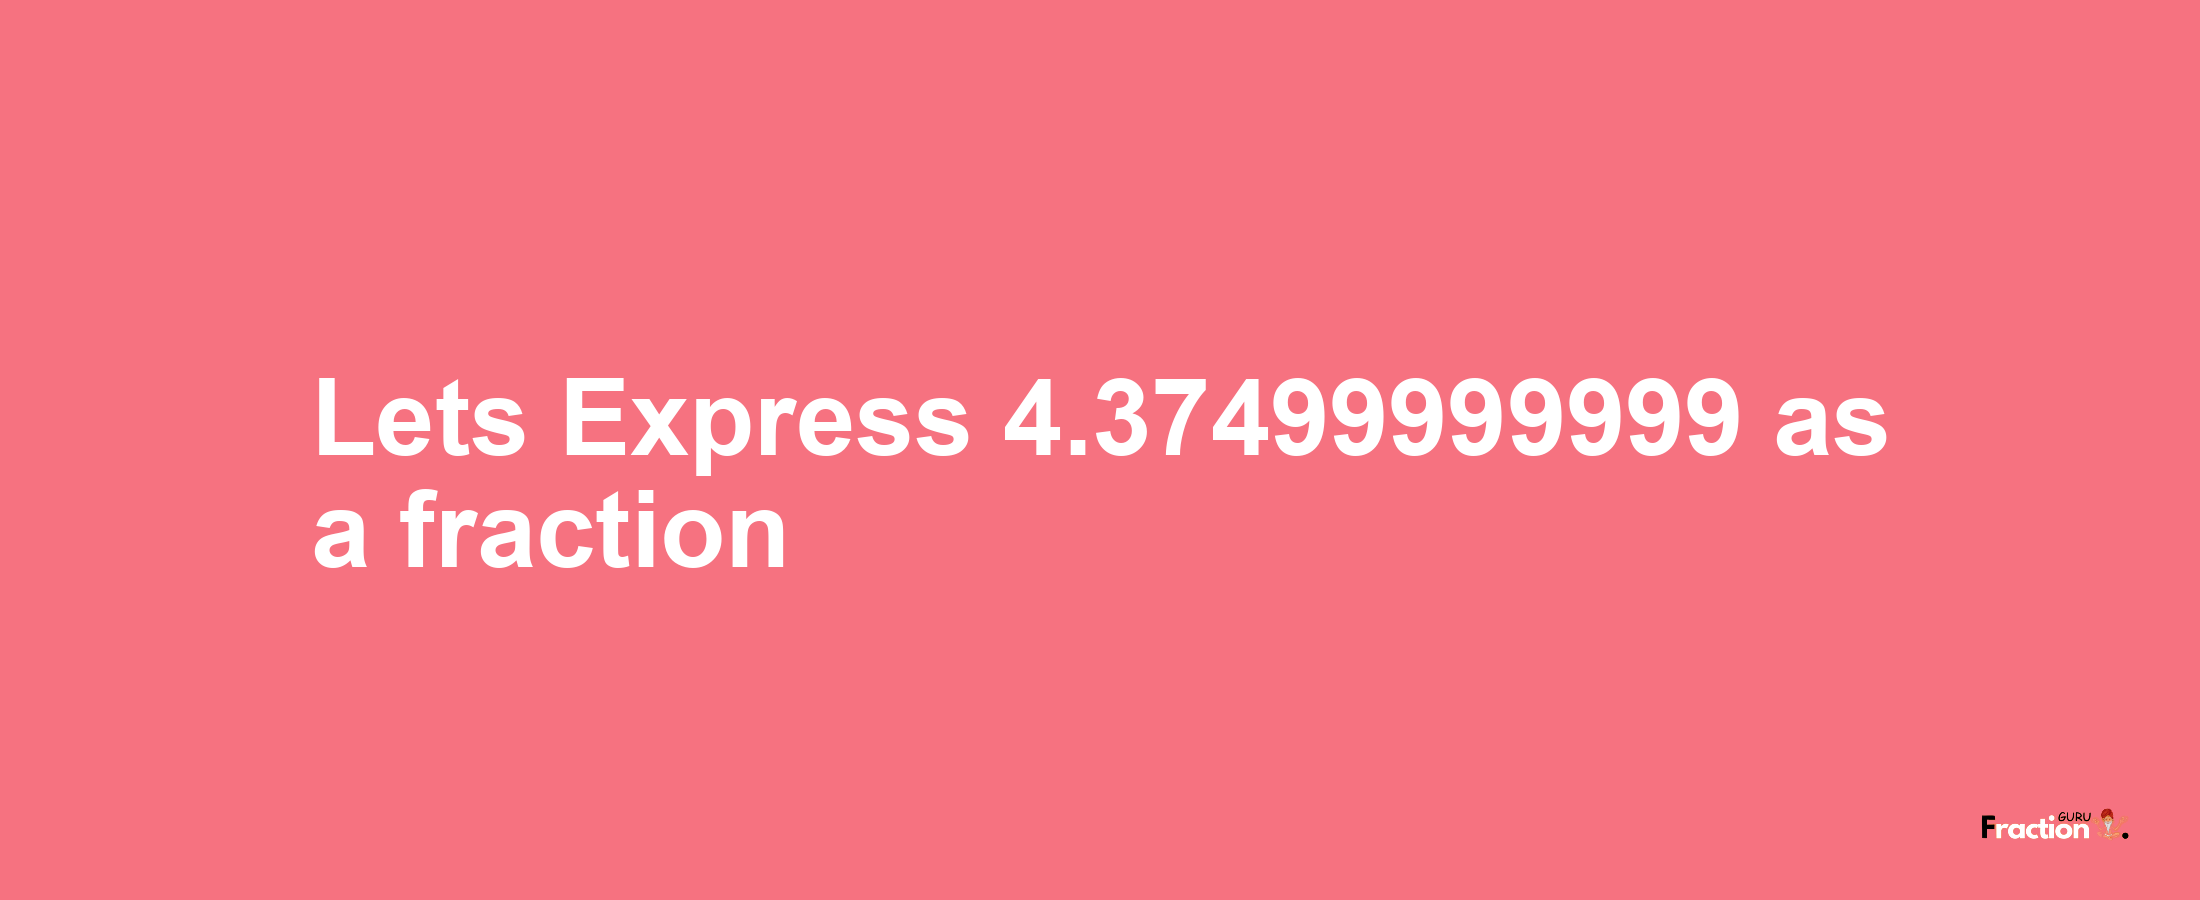 Lets Express 4.37499999999 as afraction